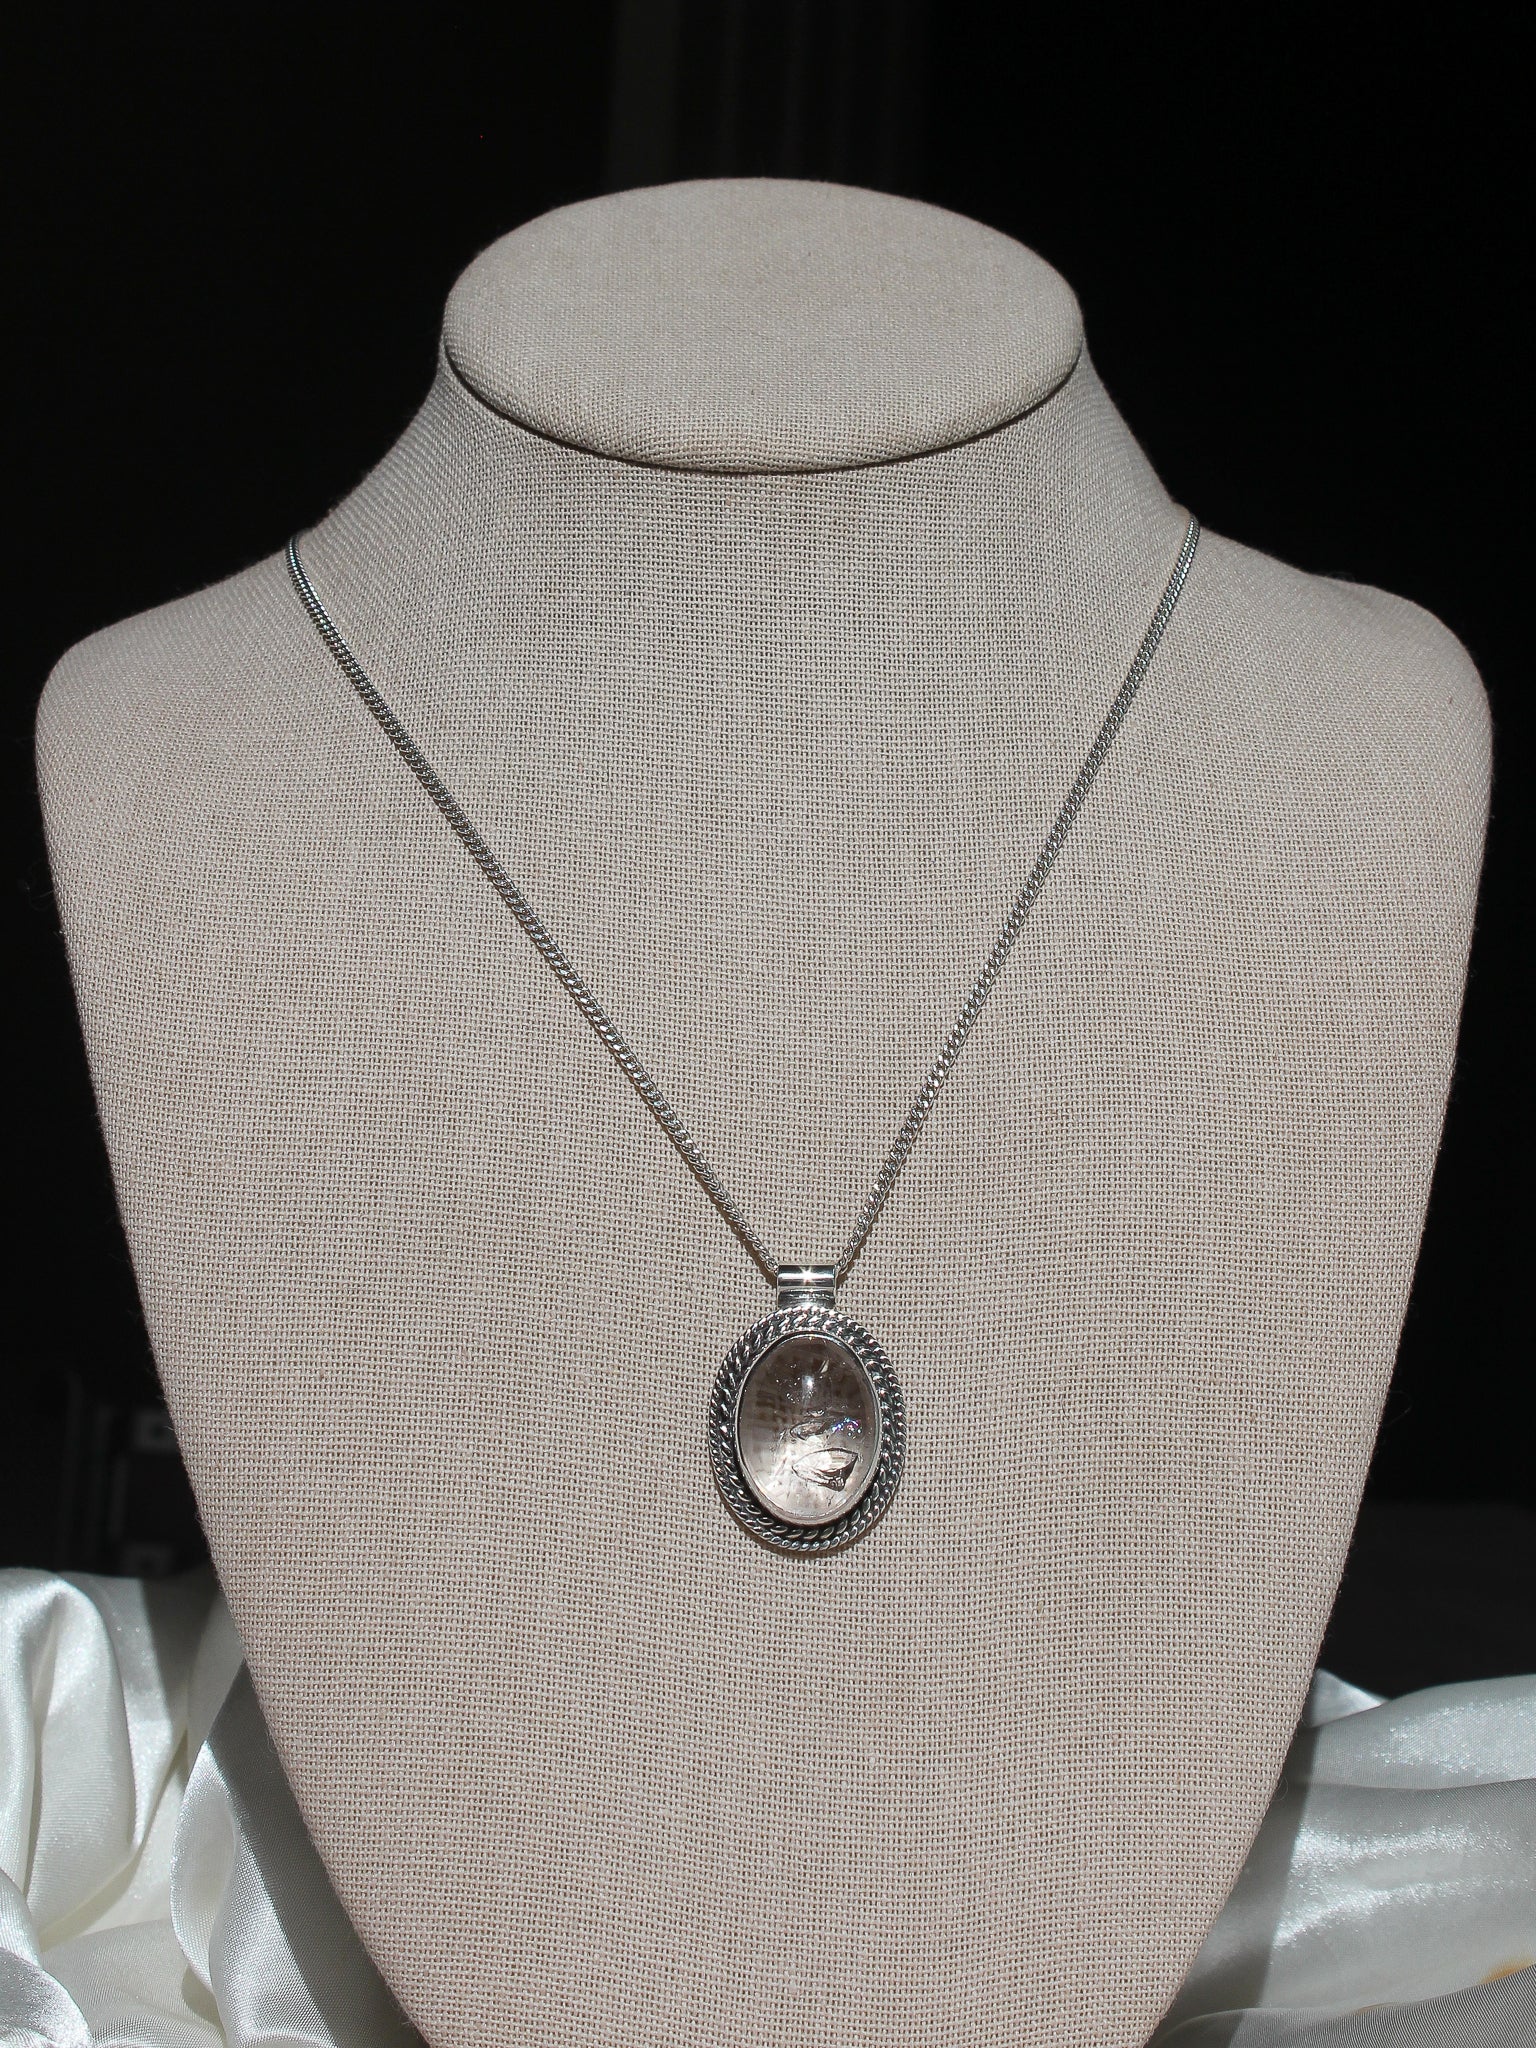 Handmade 925 sterling silver pendant with clear quartz stone with an enhydro pocket lily and William jewelry